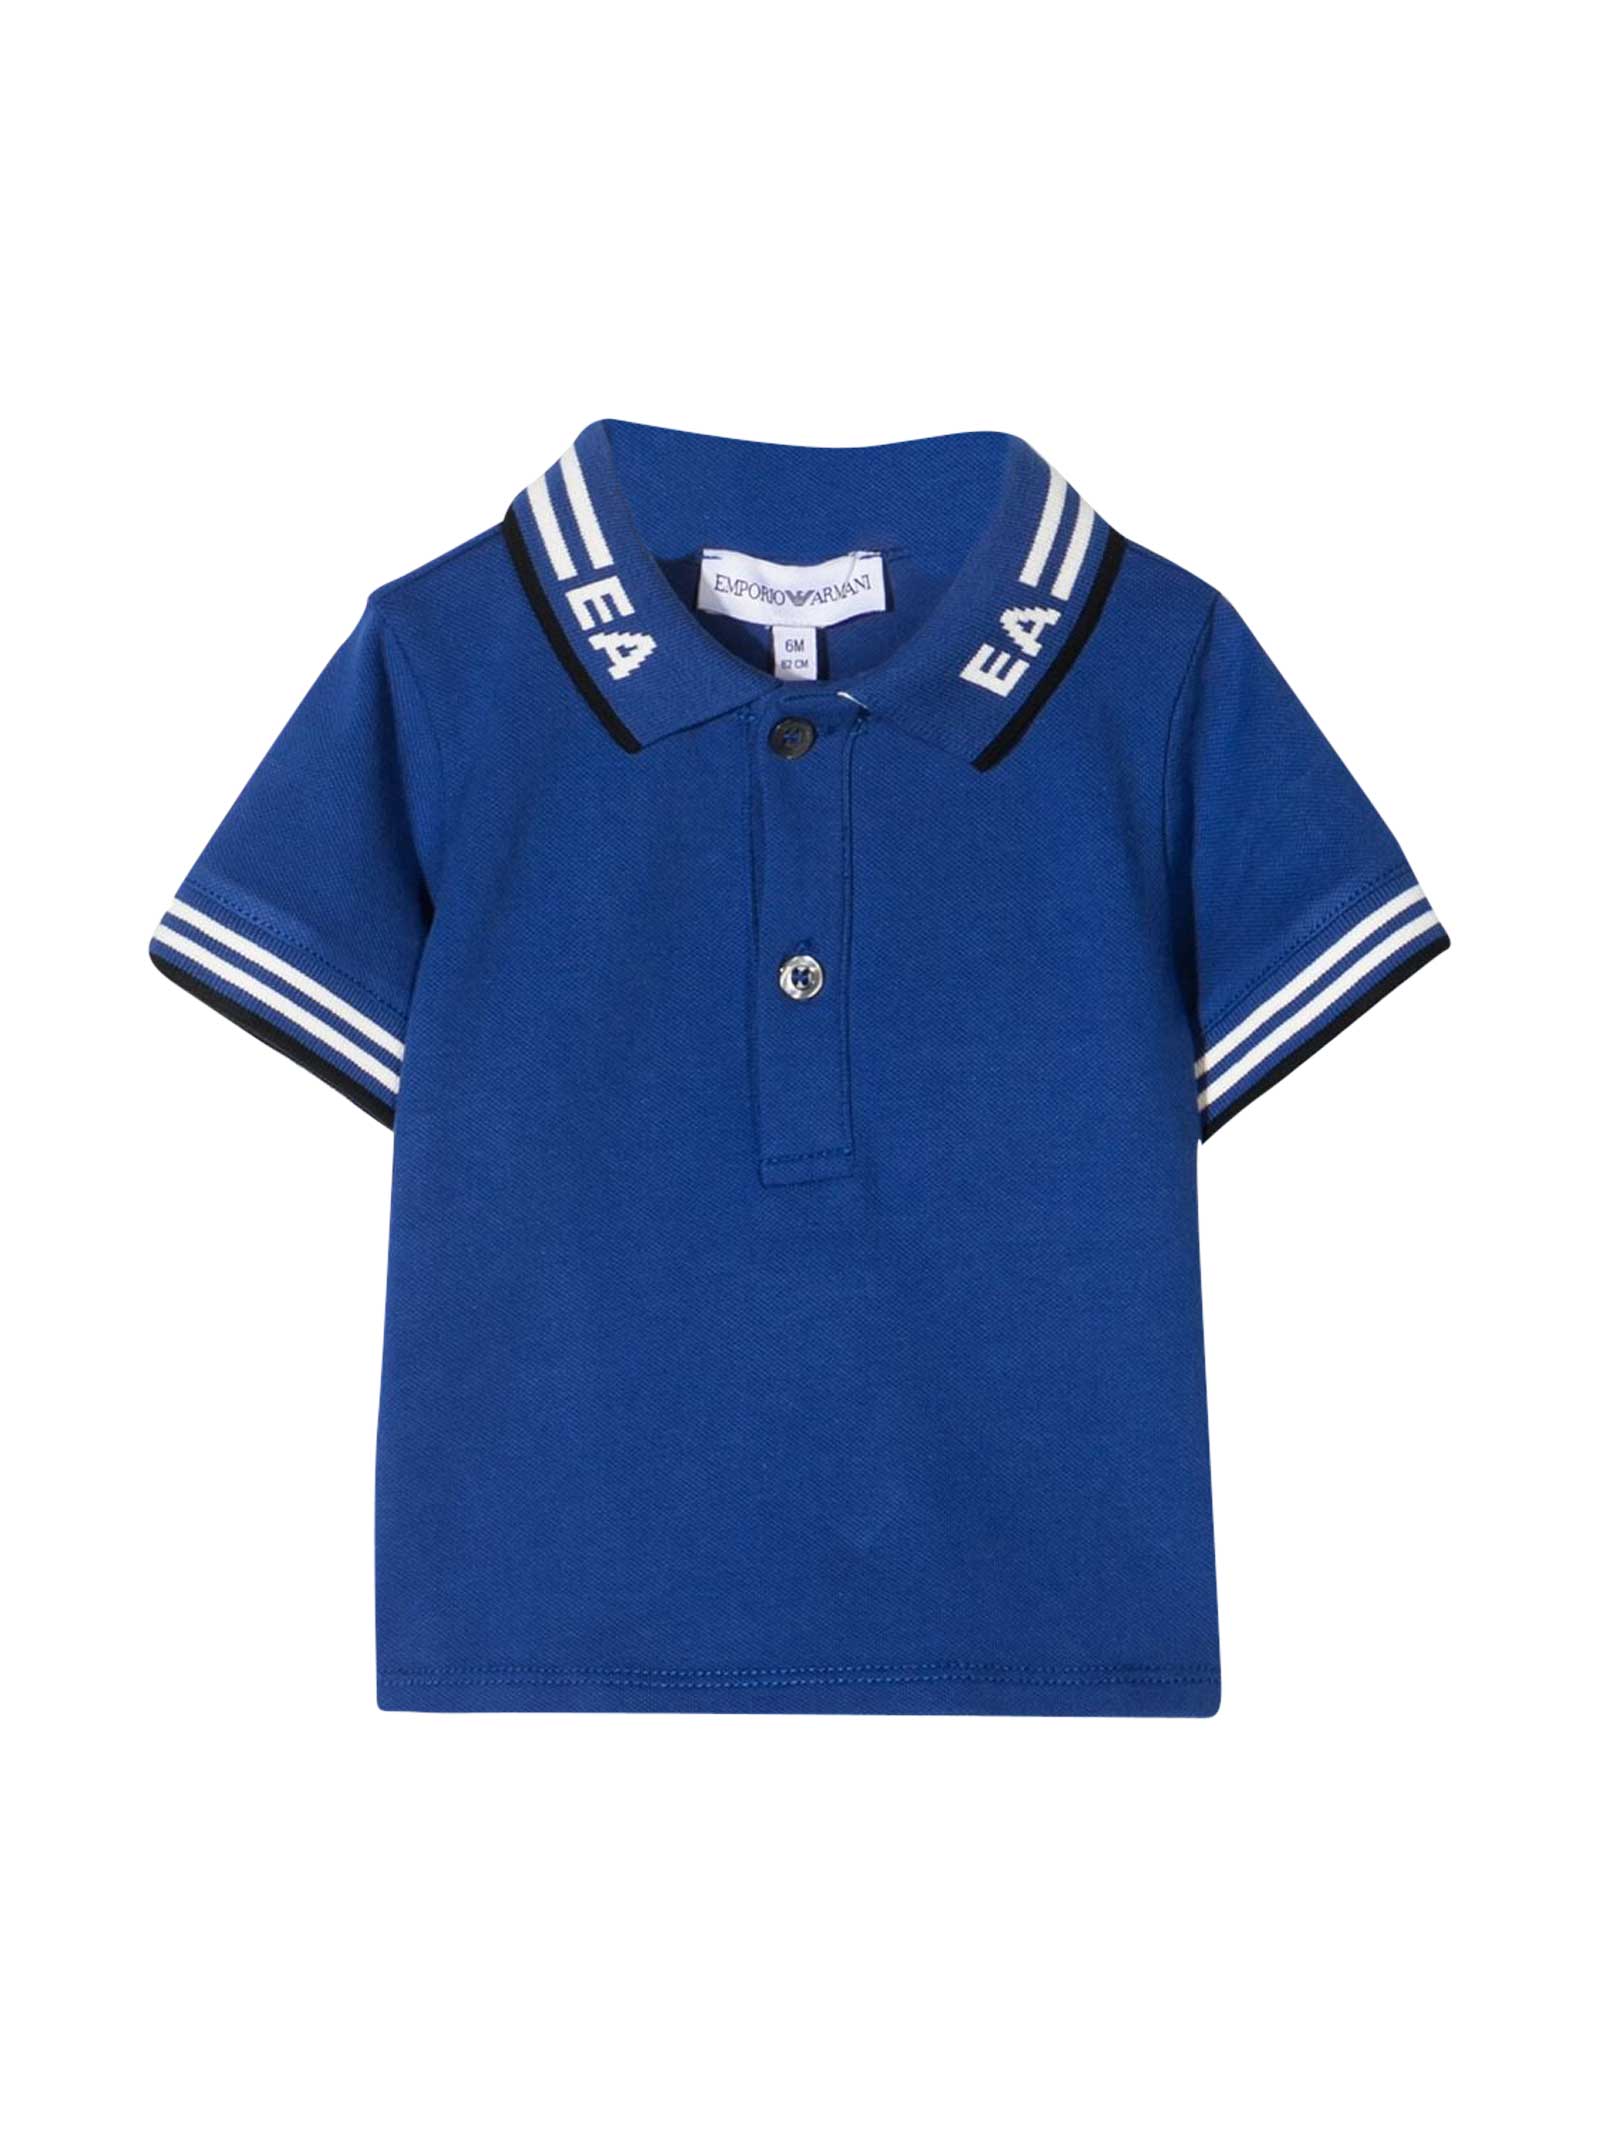 Emporio Armani Blue Polo Shirt With White And Black Details